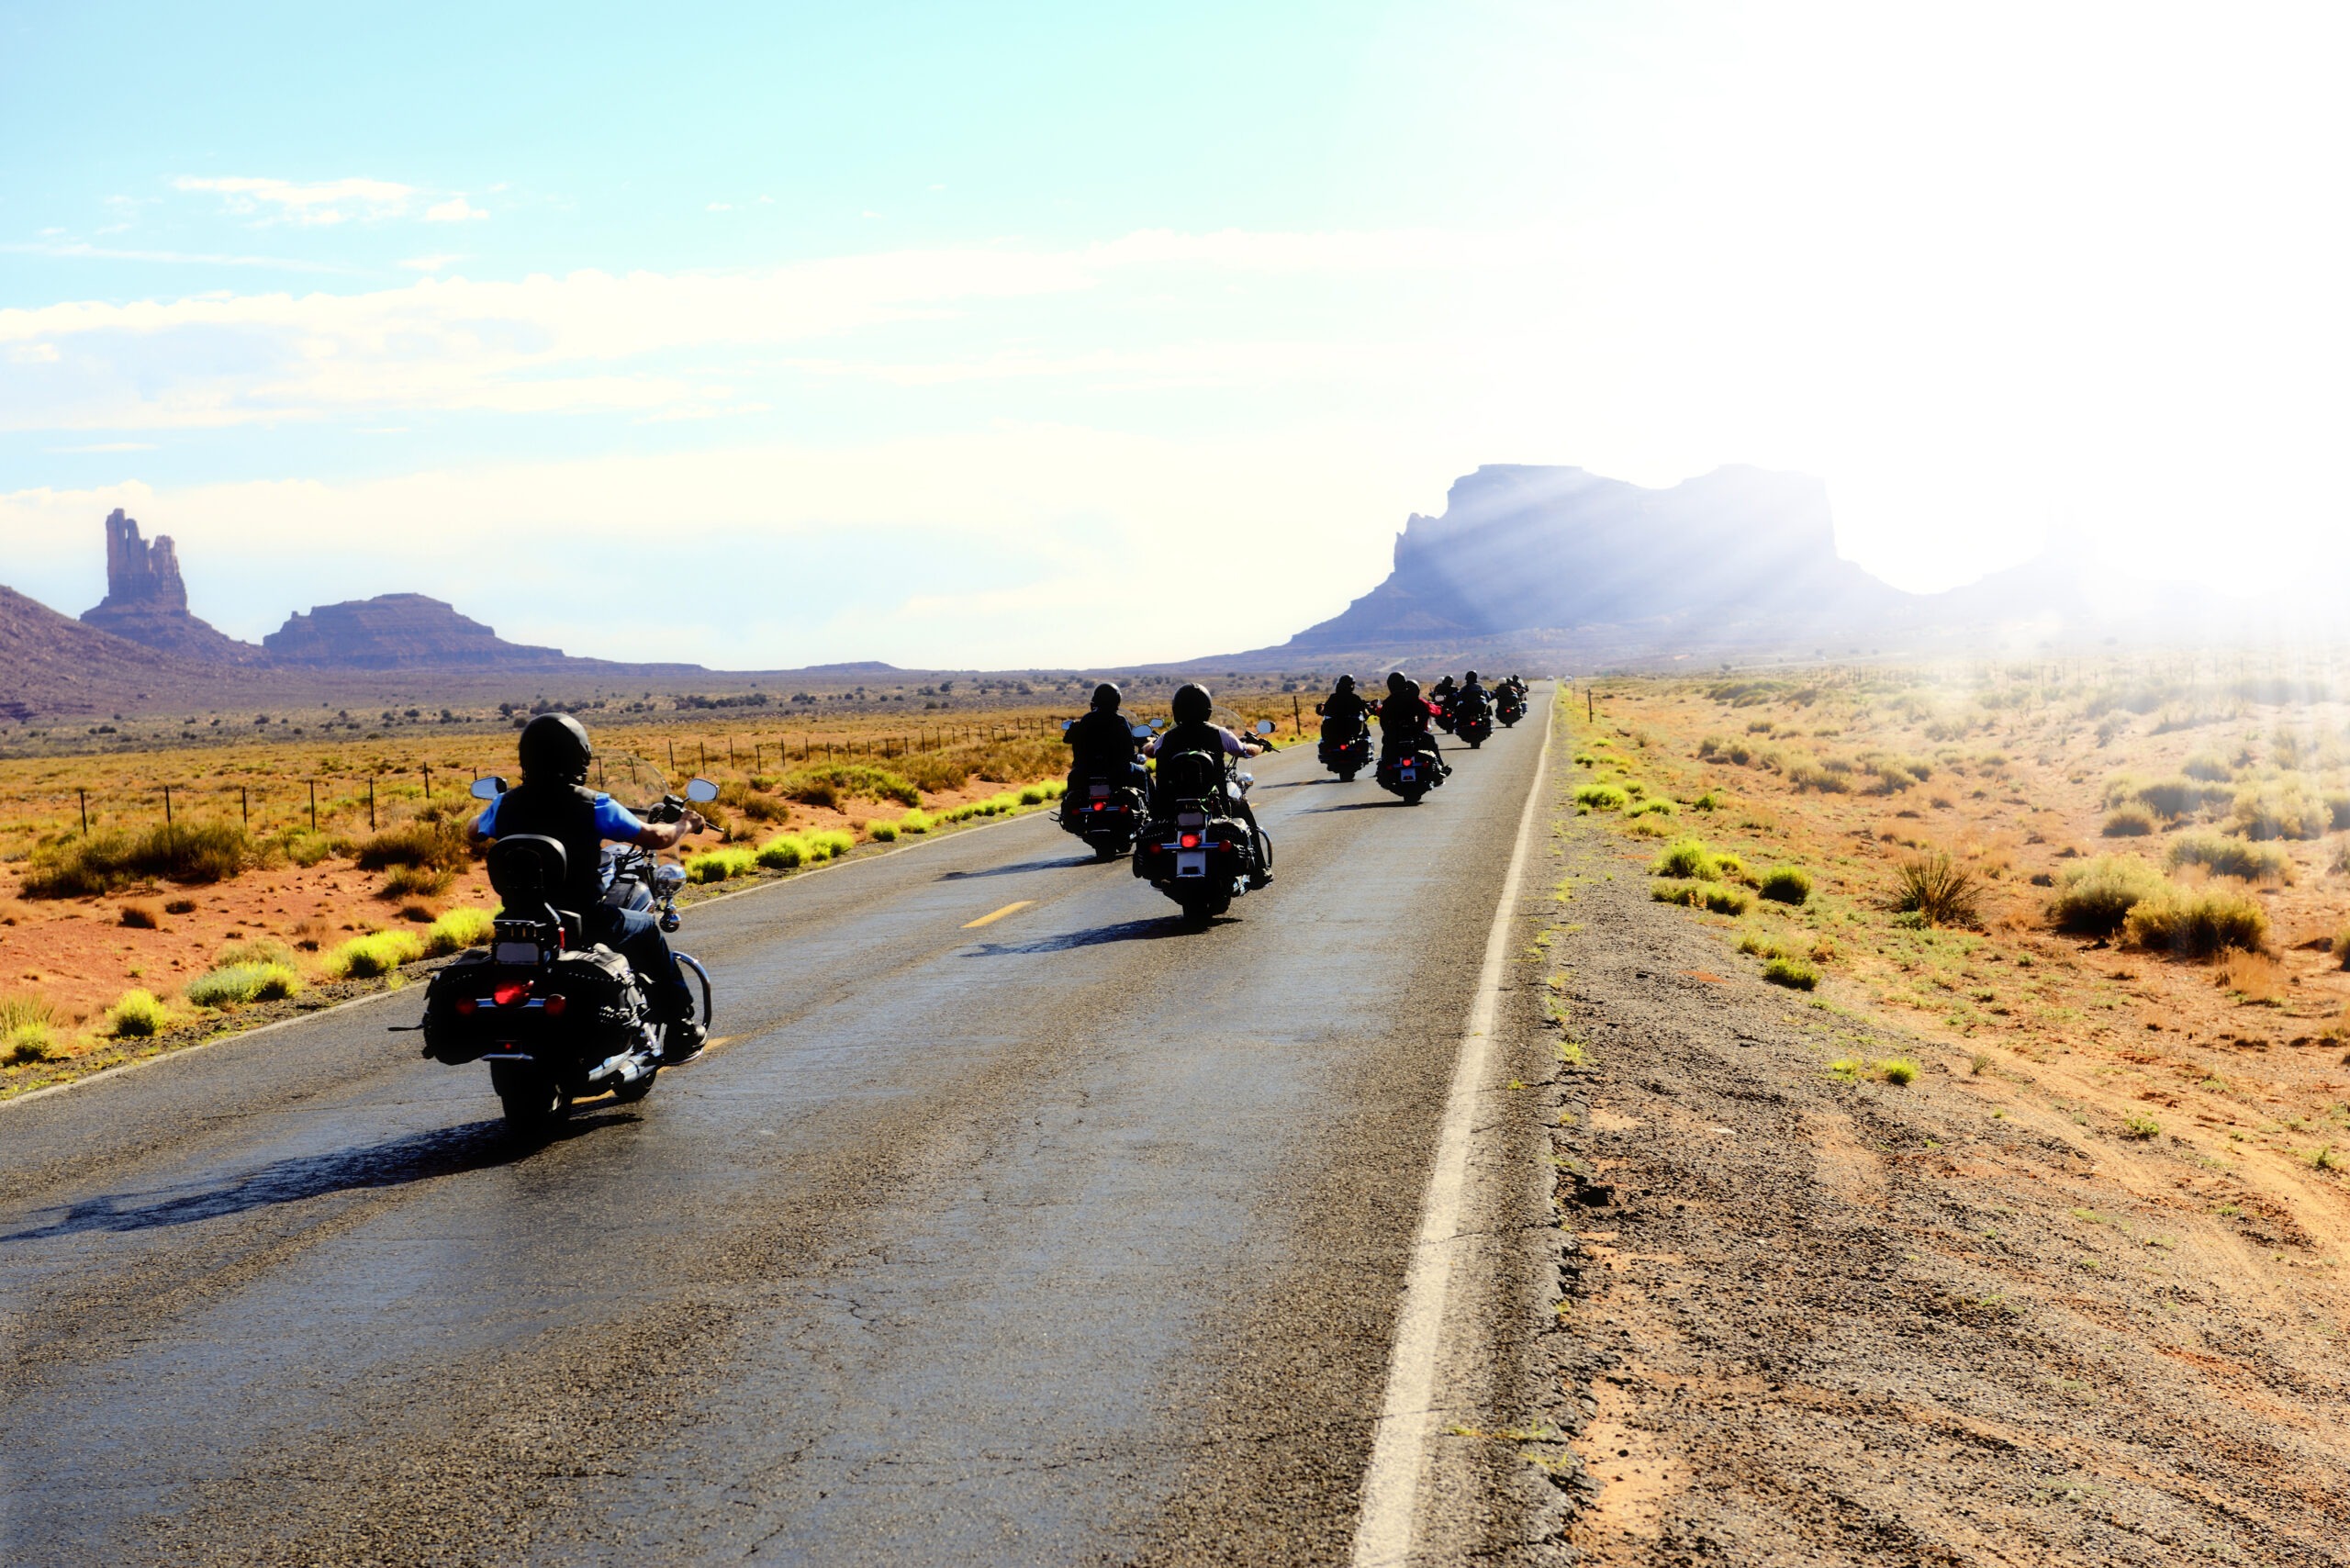 Where do Most Motorcycle Accidents Happen?